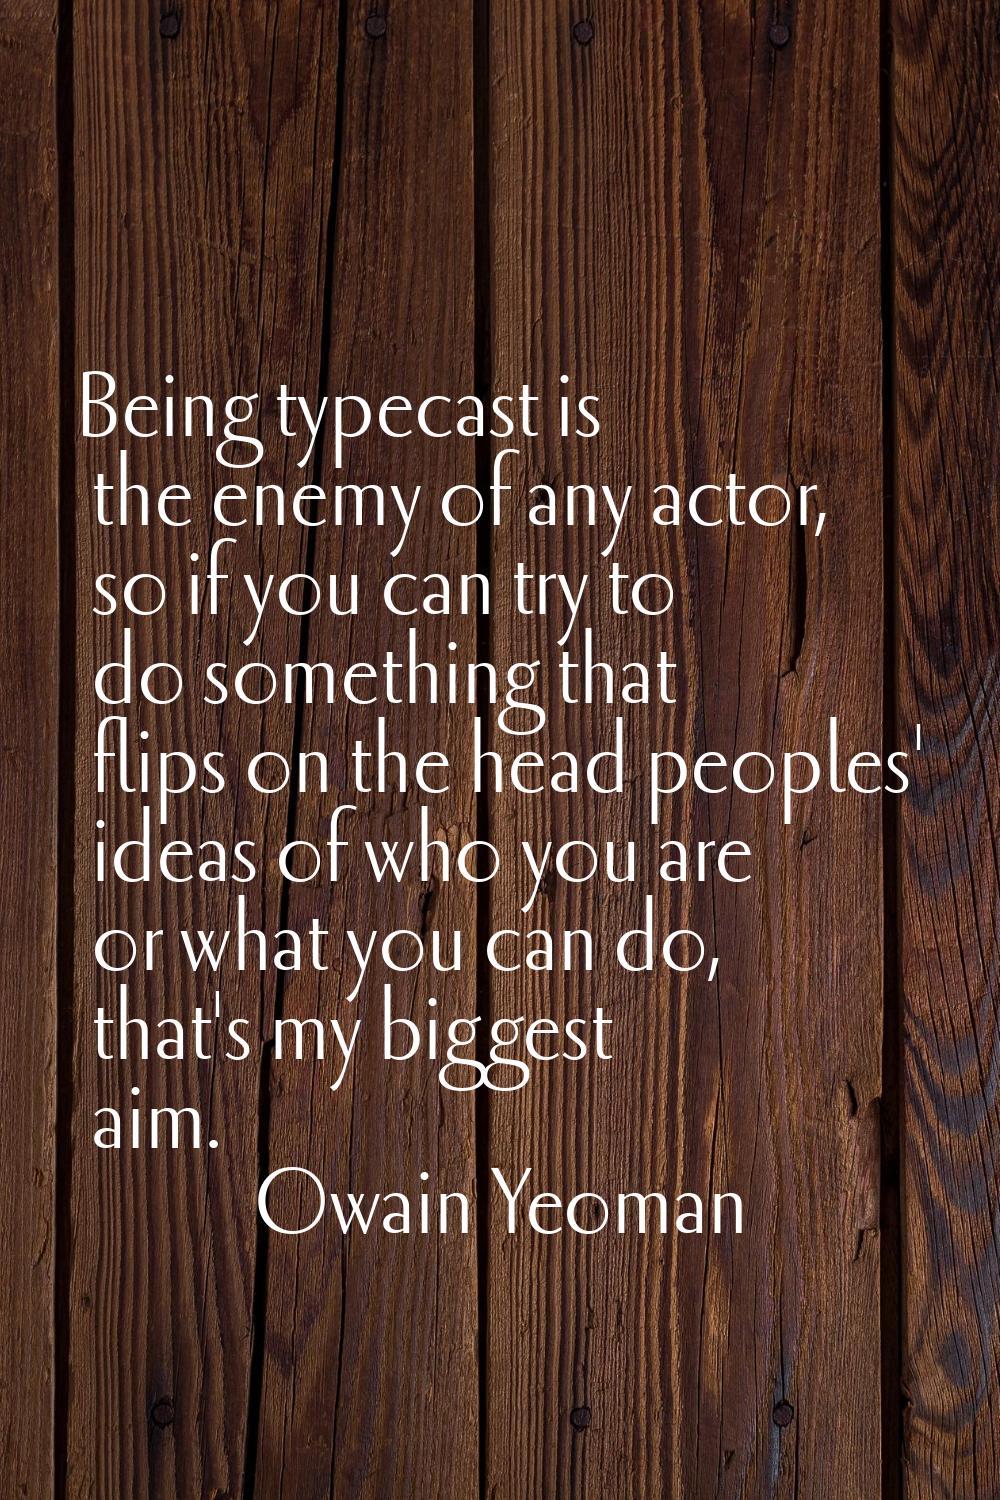 Being typecast is the enemy of any actor, so if you can try to do something that flips on the head 